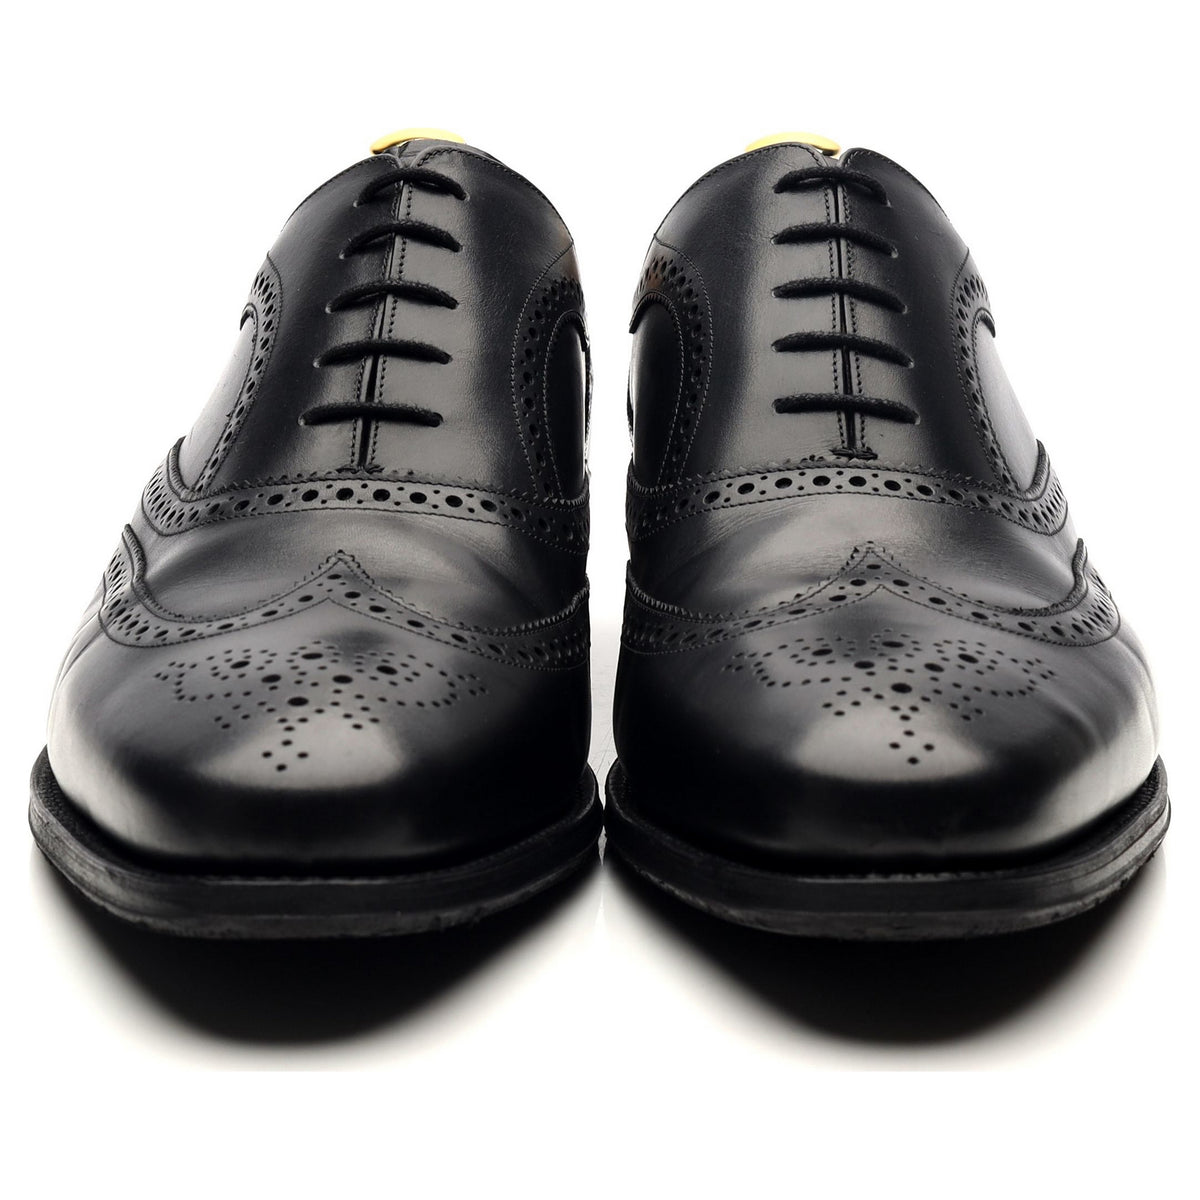 &#39;Turing&#39; Black Leather Oxford Brogues UK 12 FX